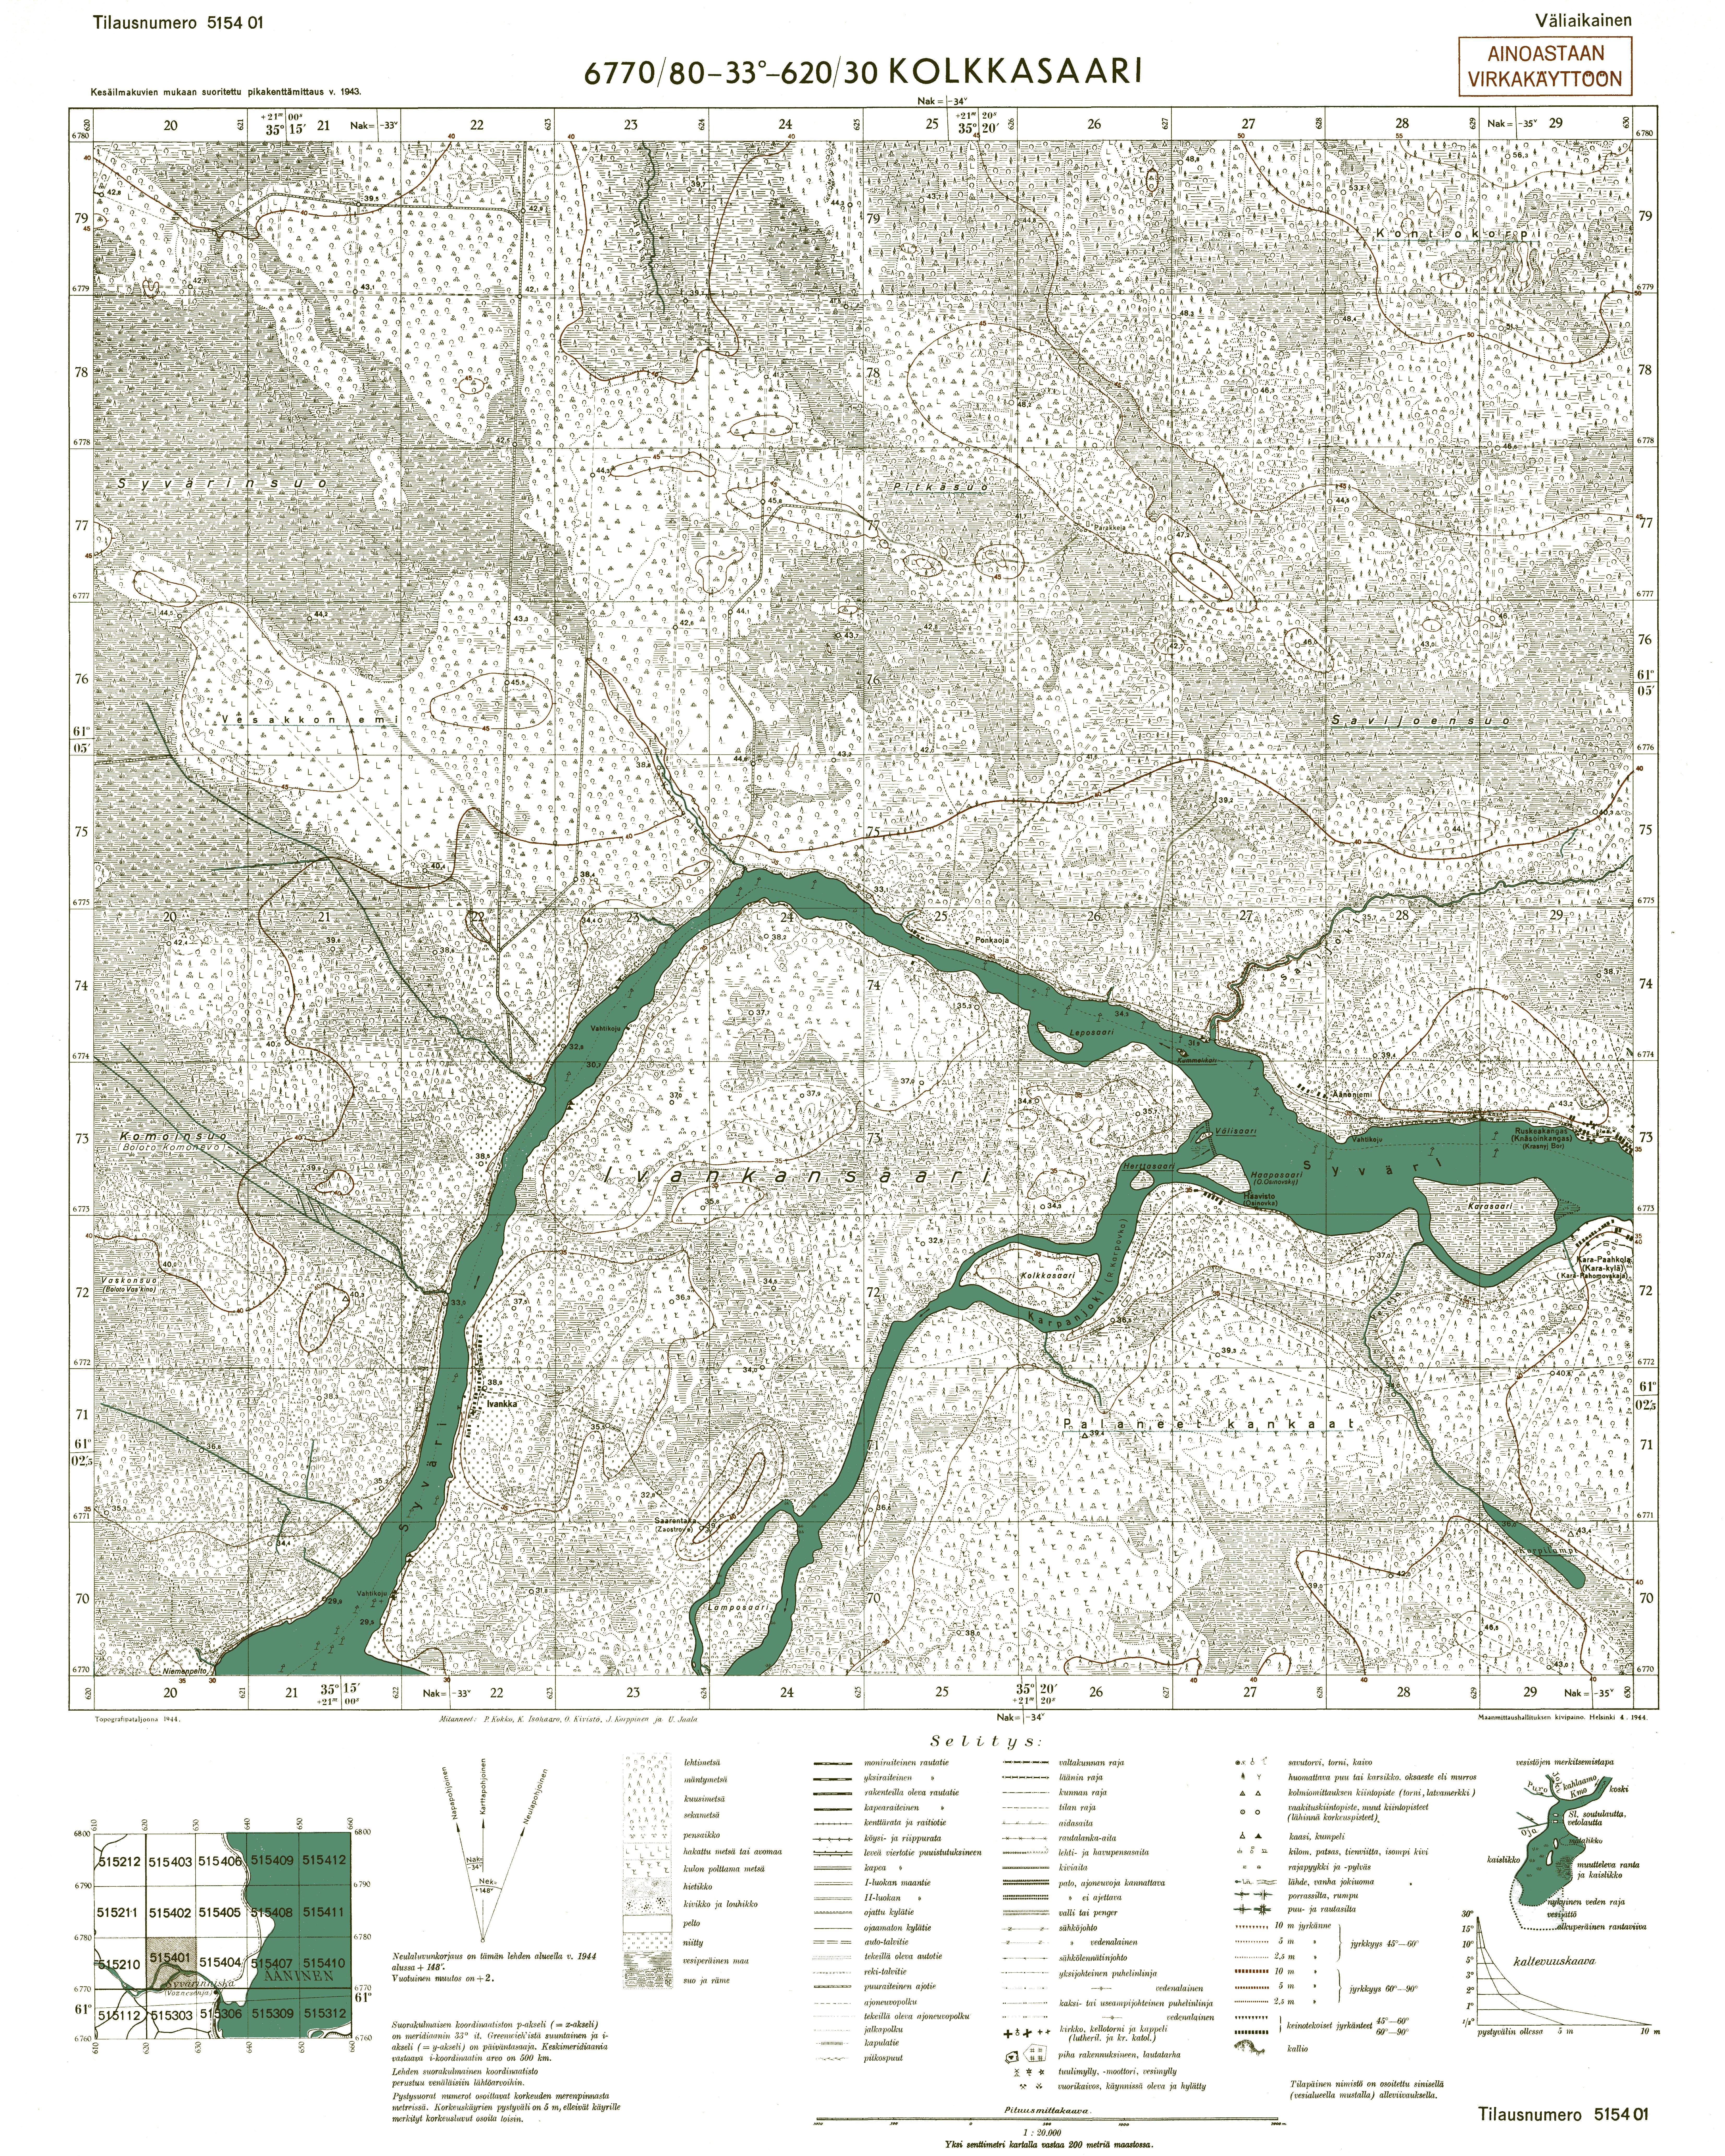 Kolkoostrov Island. Kolkkasaari. Topografikartta 515401. Topographic map from 1944. Use the zooming tool to explore in higher level of detail. Obtain as a quality print or high resolution image